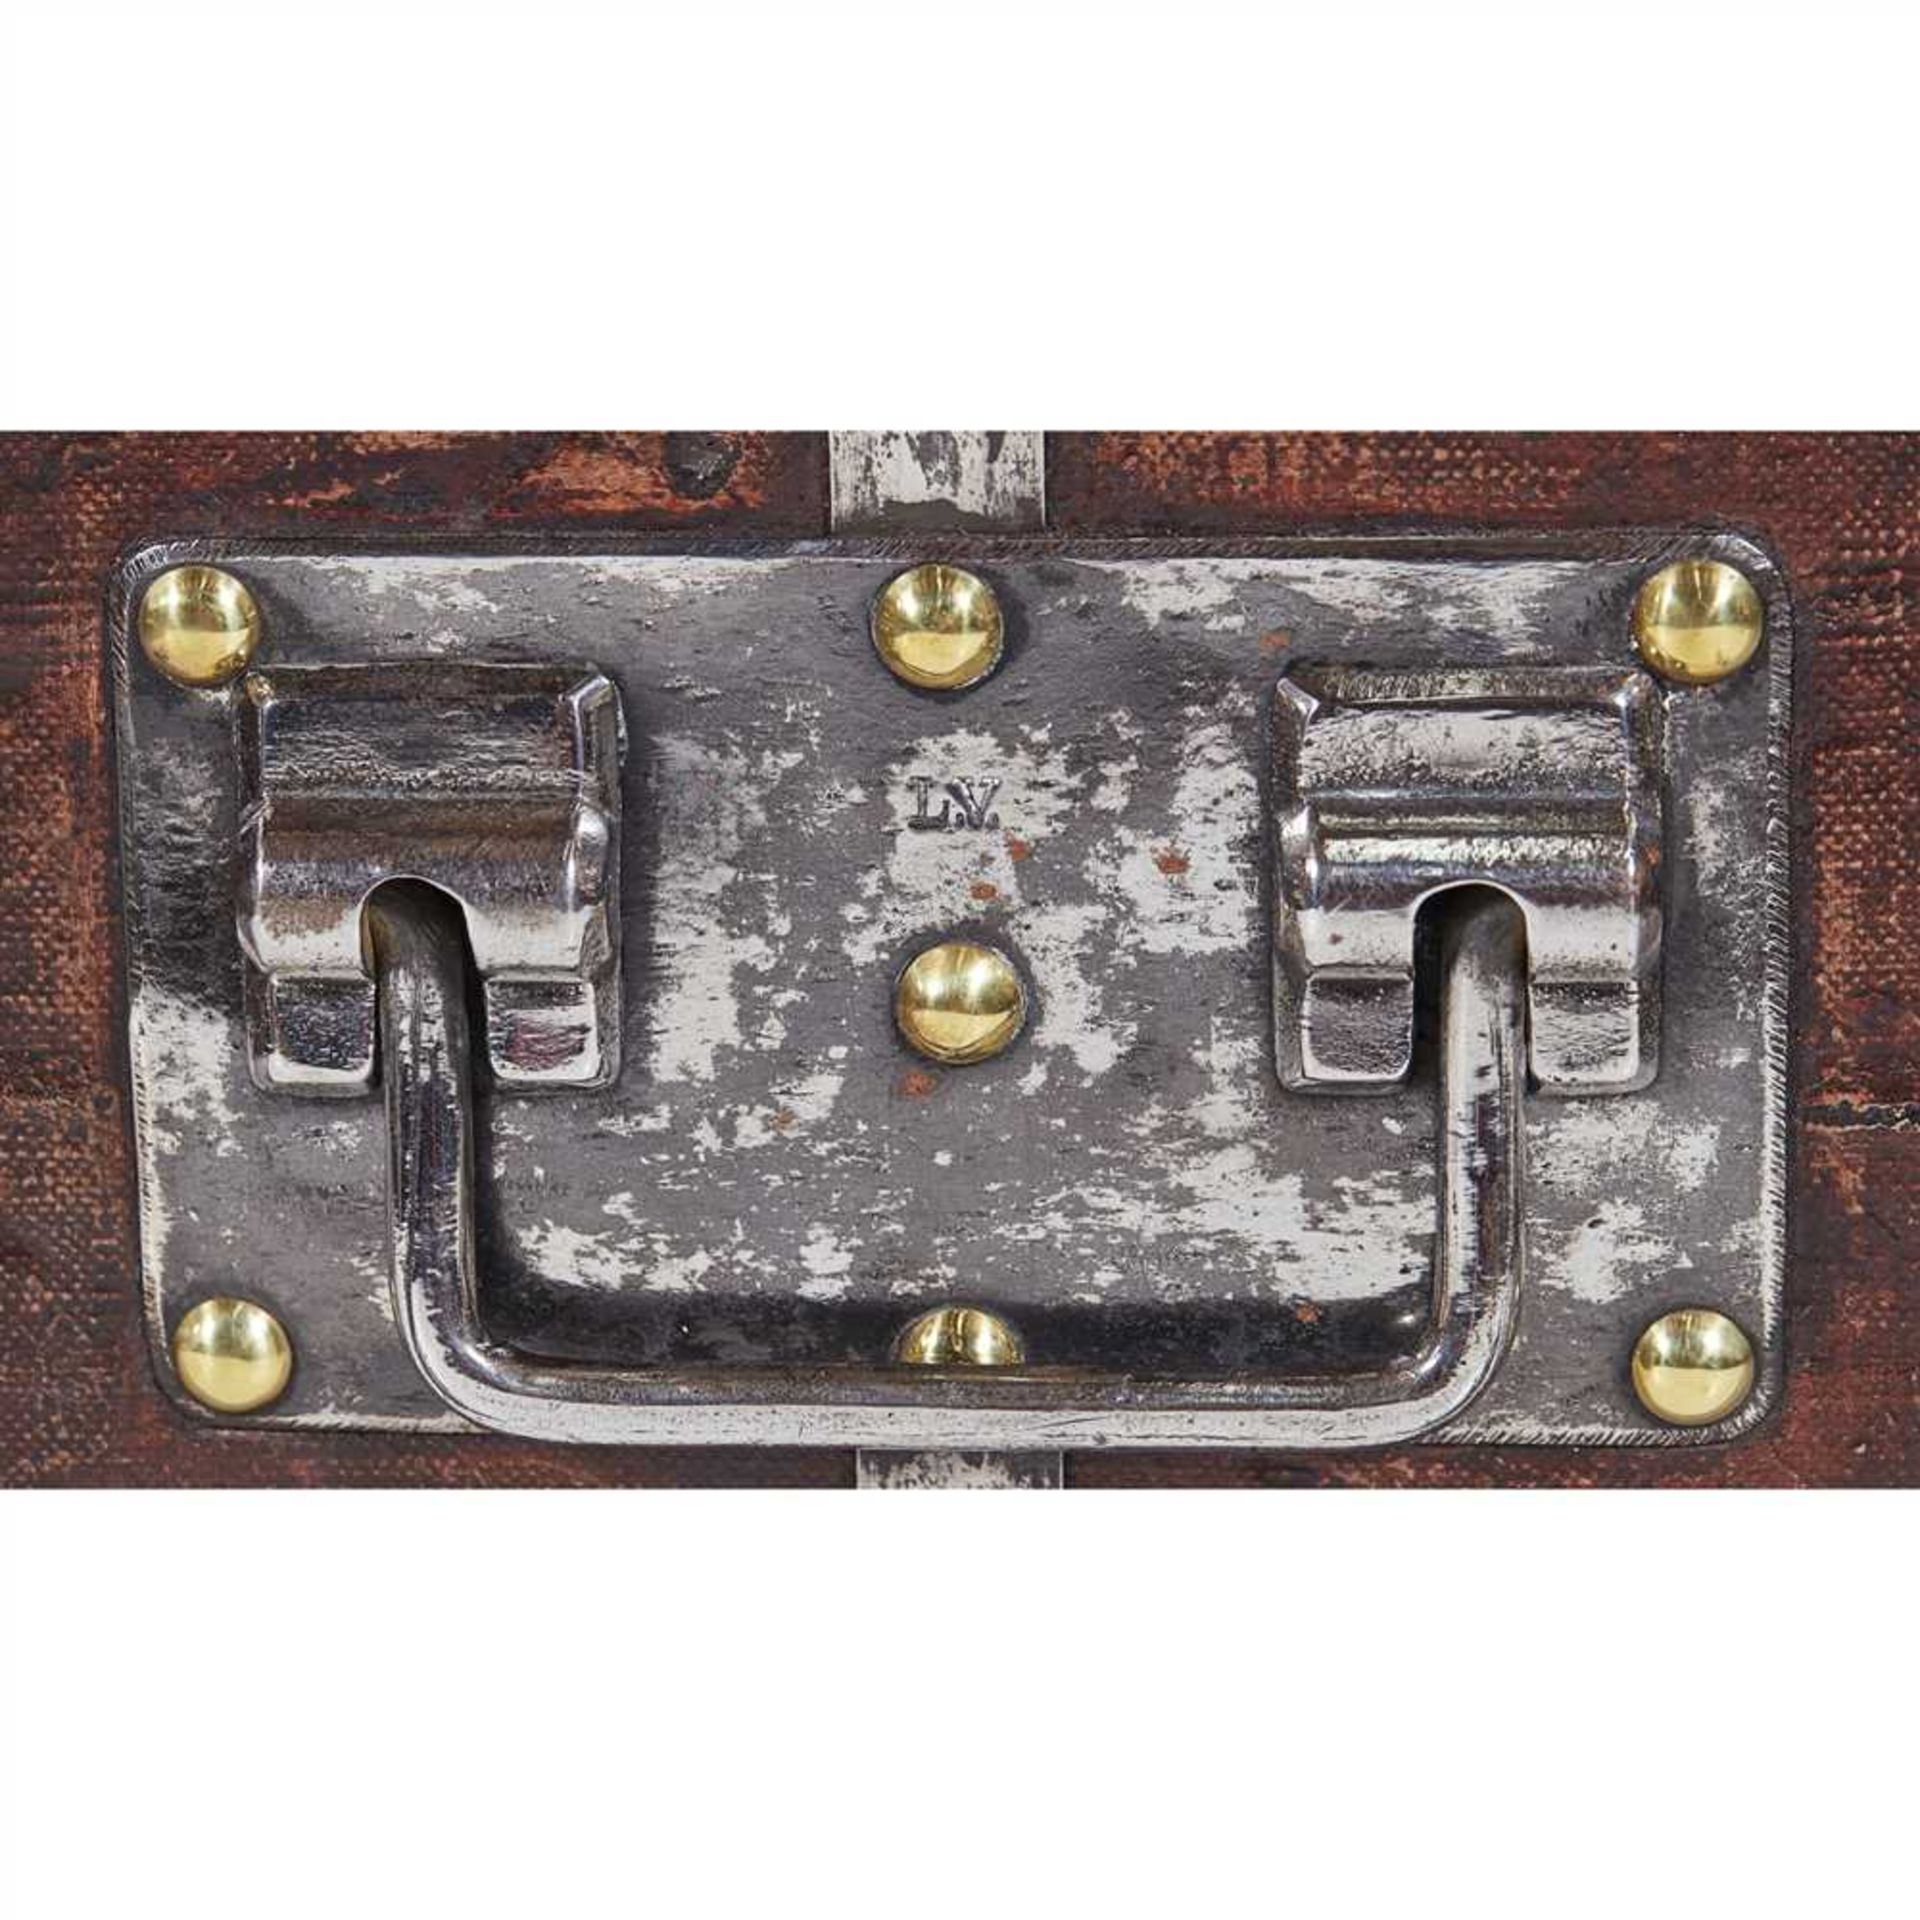 LOUIS VUITTON CANVAS AND ALUMINIUM COURIER TRUNK LATE 19TH CENTURY - Image 3 of 3